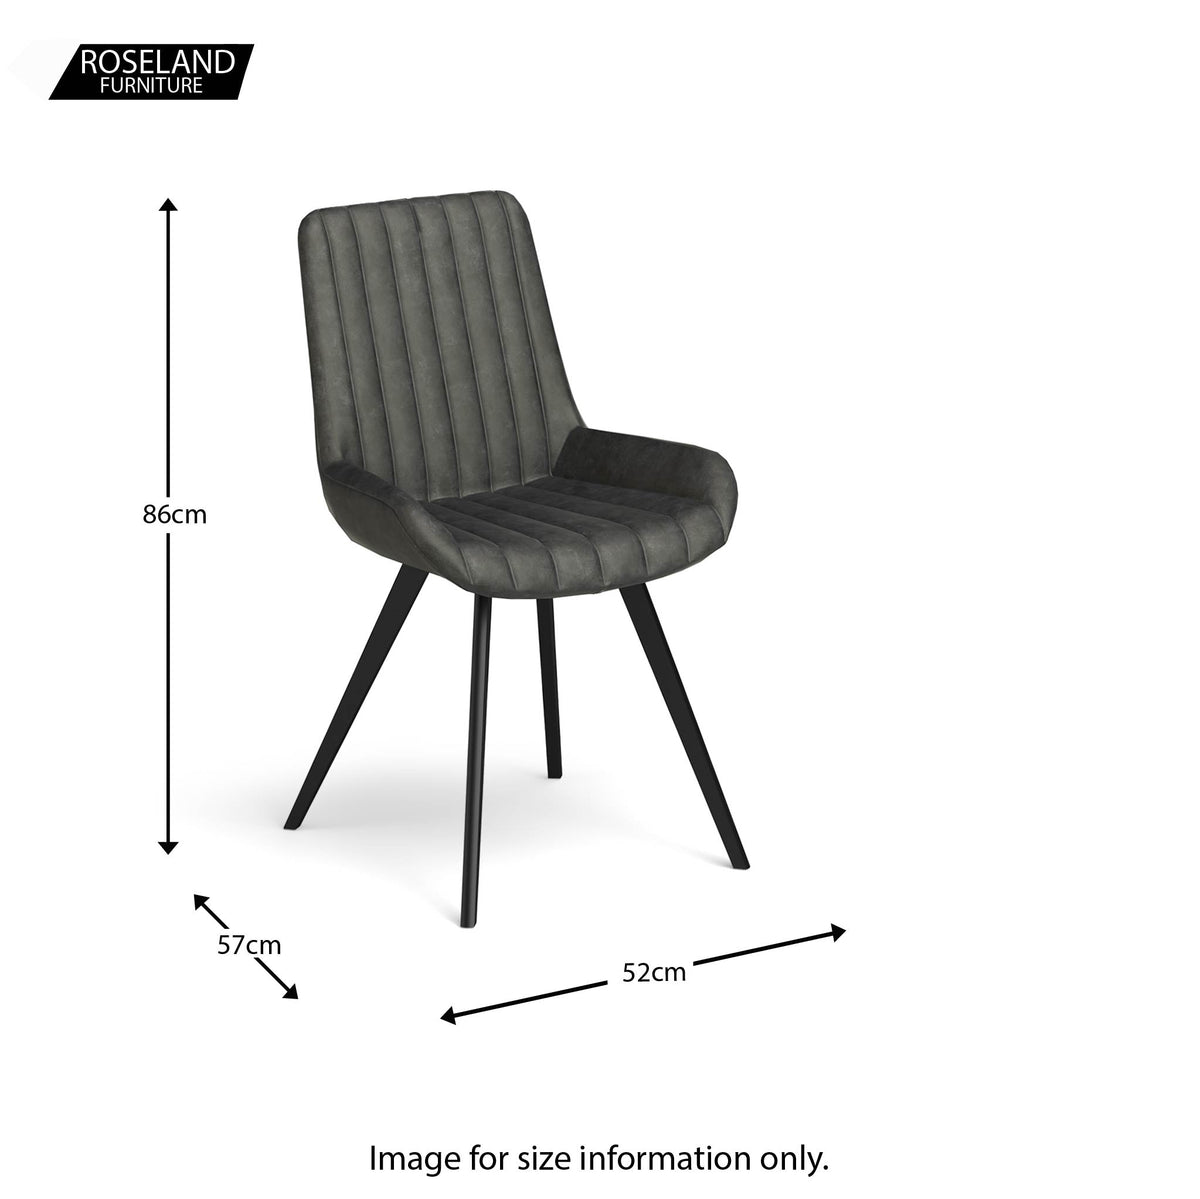 Soho Dining Chair - size guide